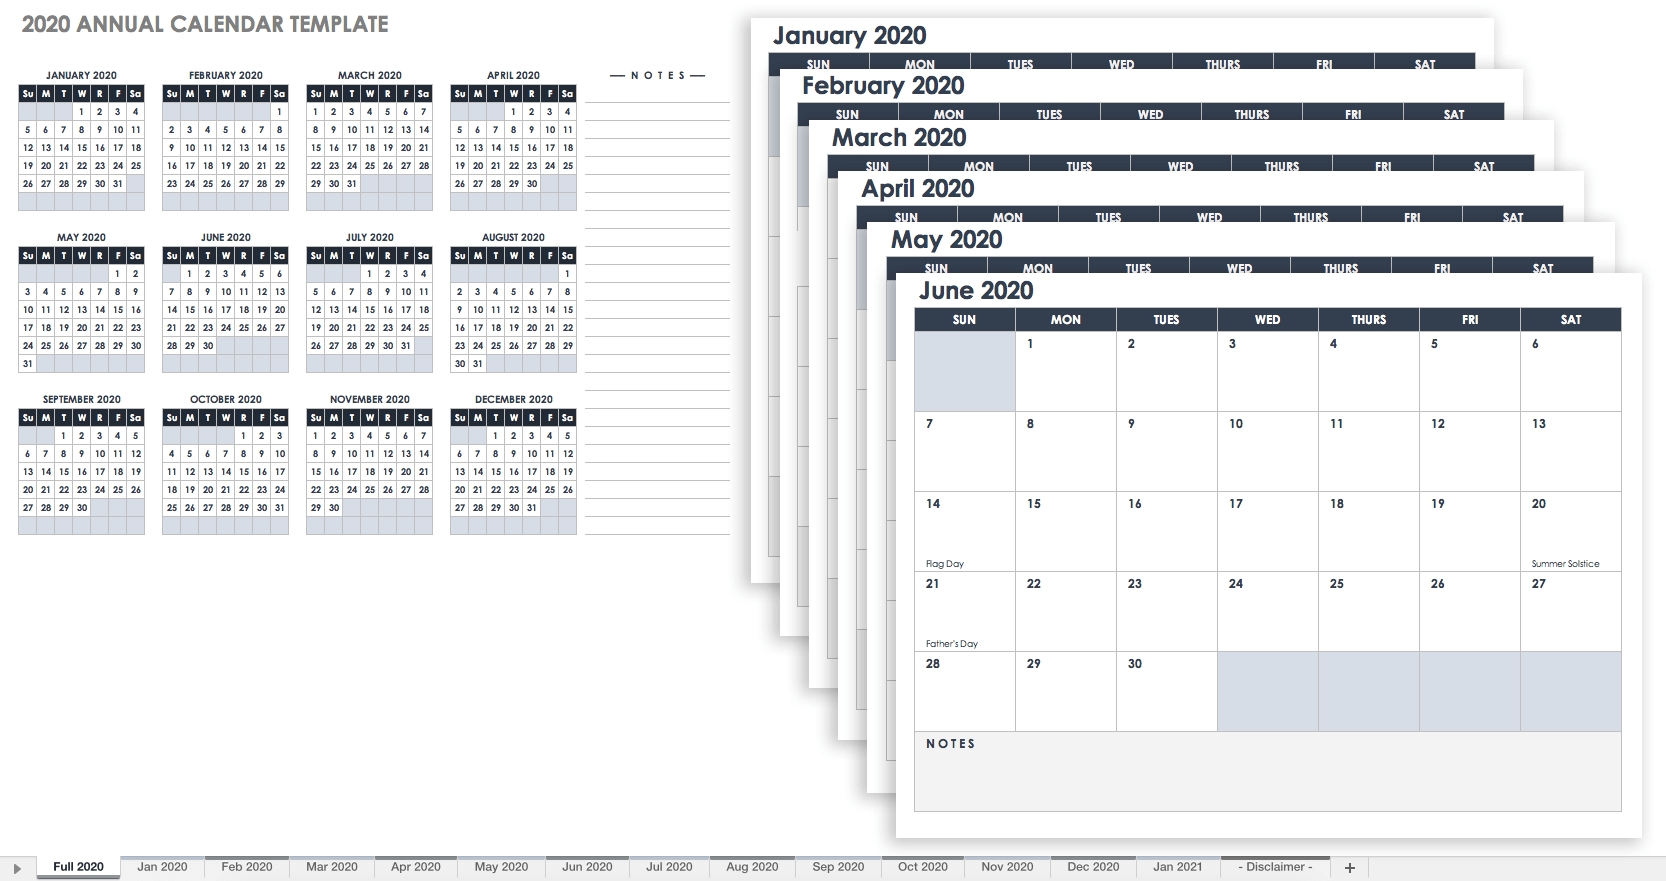 Free Blank Calendar Templates - Smartsheet within Printable Monthly Calendar With Lines